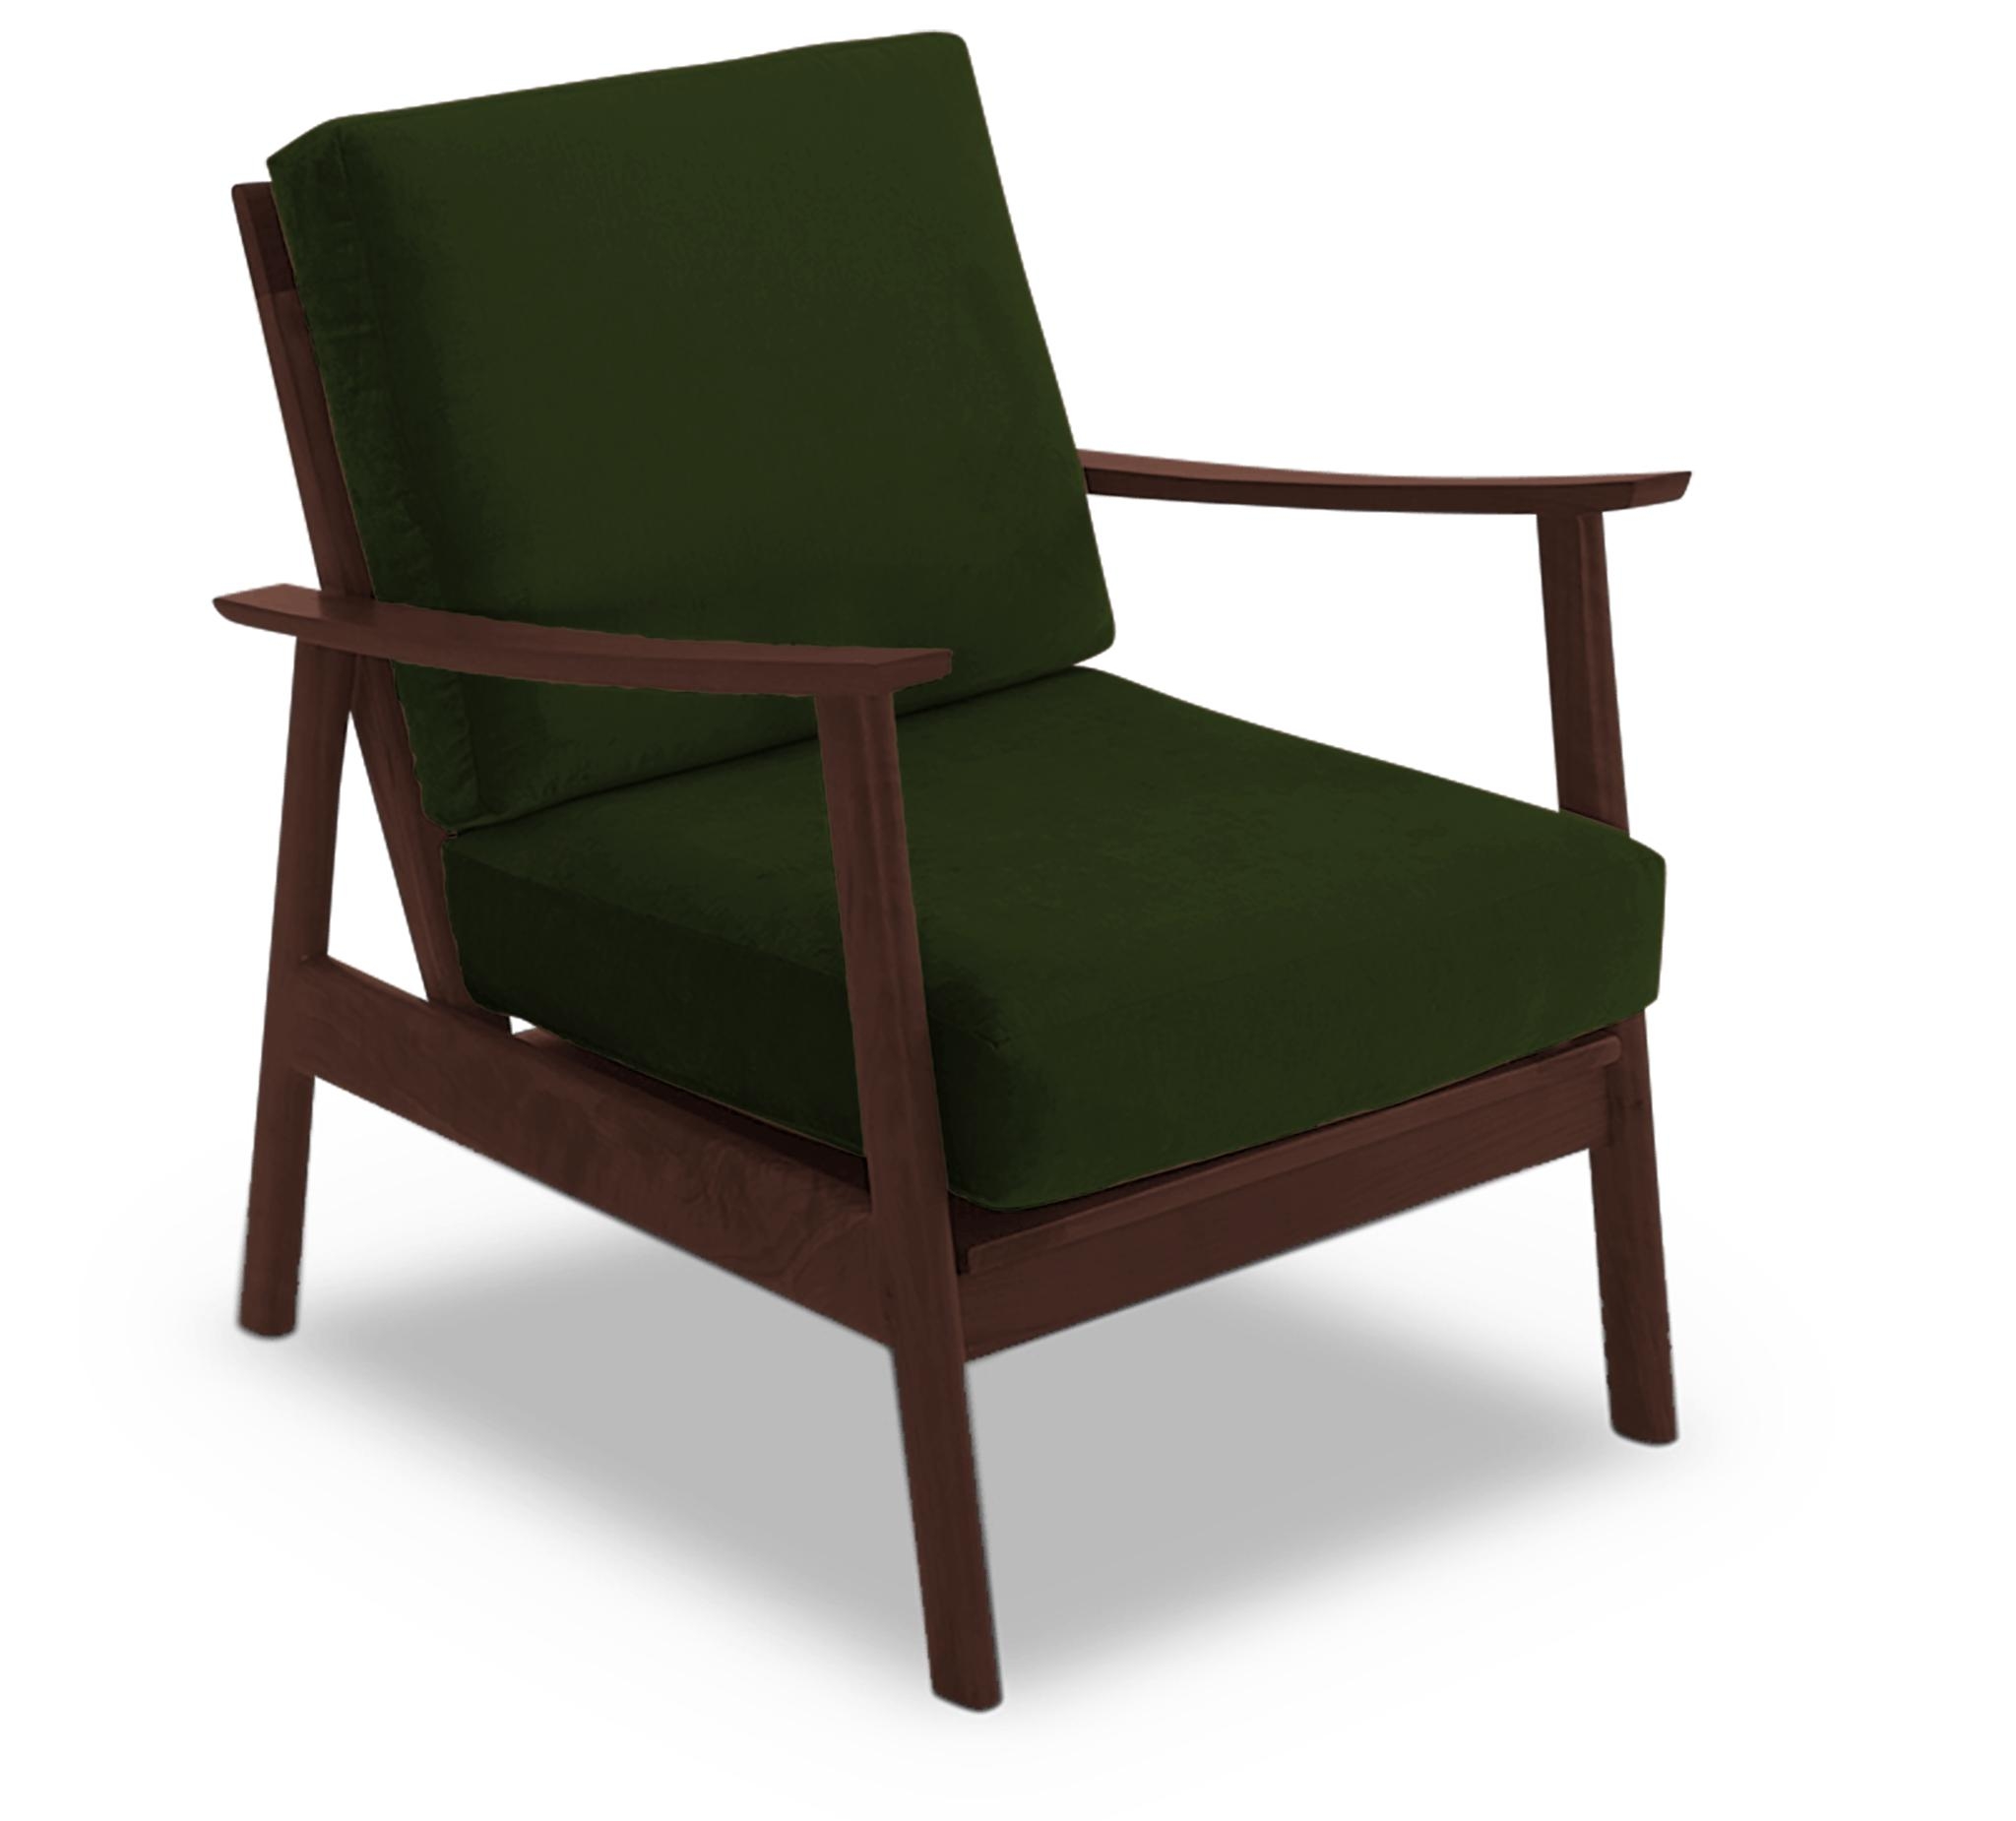 Green Paley Mid Century Modern Chair - Royale Forest - Walnut - Image 1